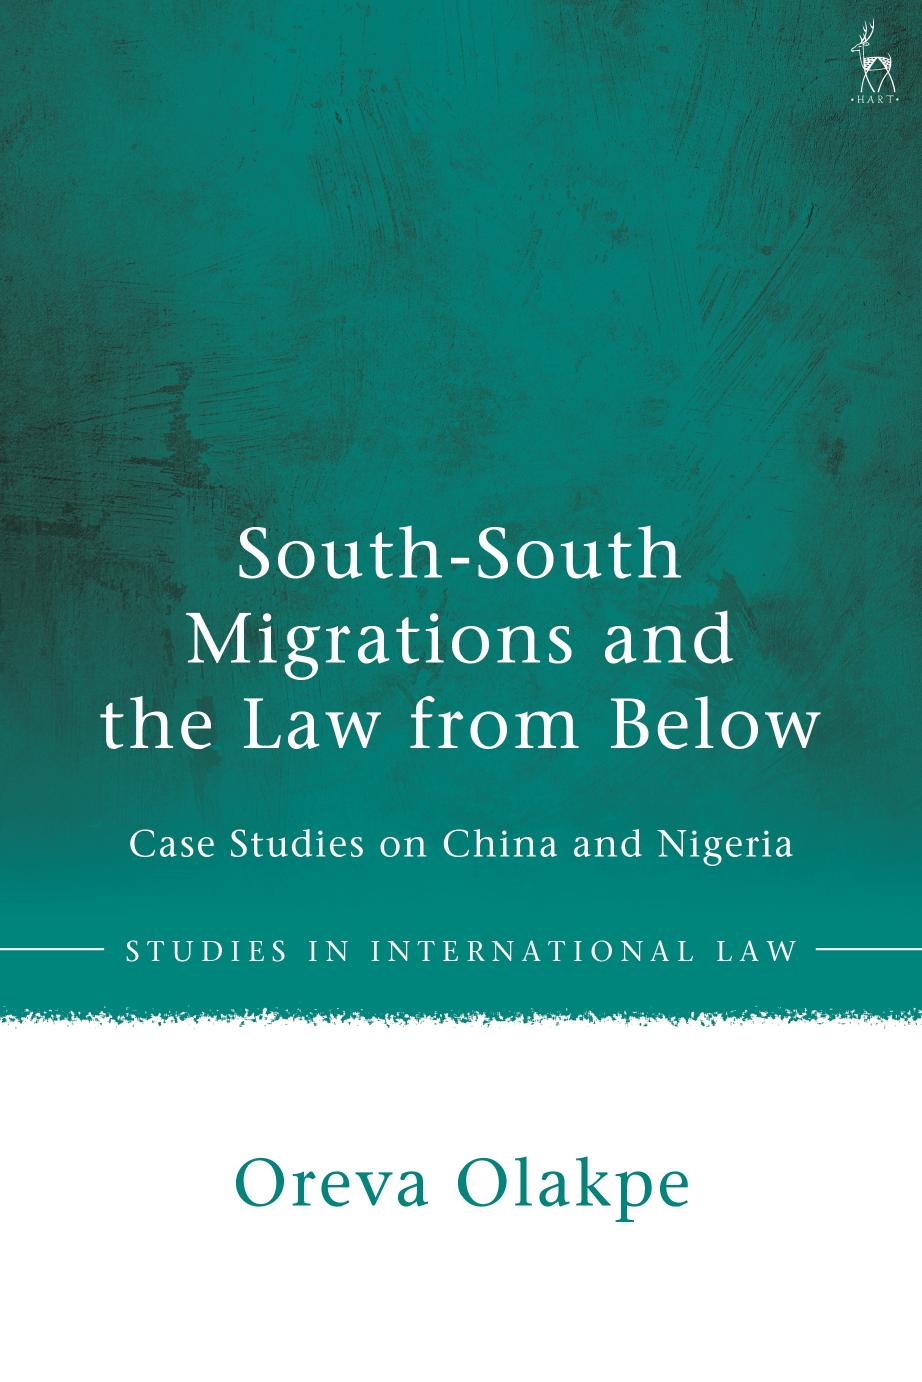 South-South Migrations and the Law from Below: Case Studies on China and Nigeria by Oreva Olakpe